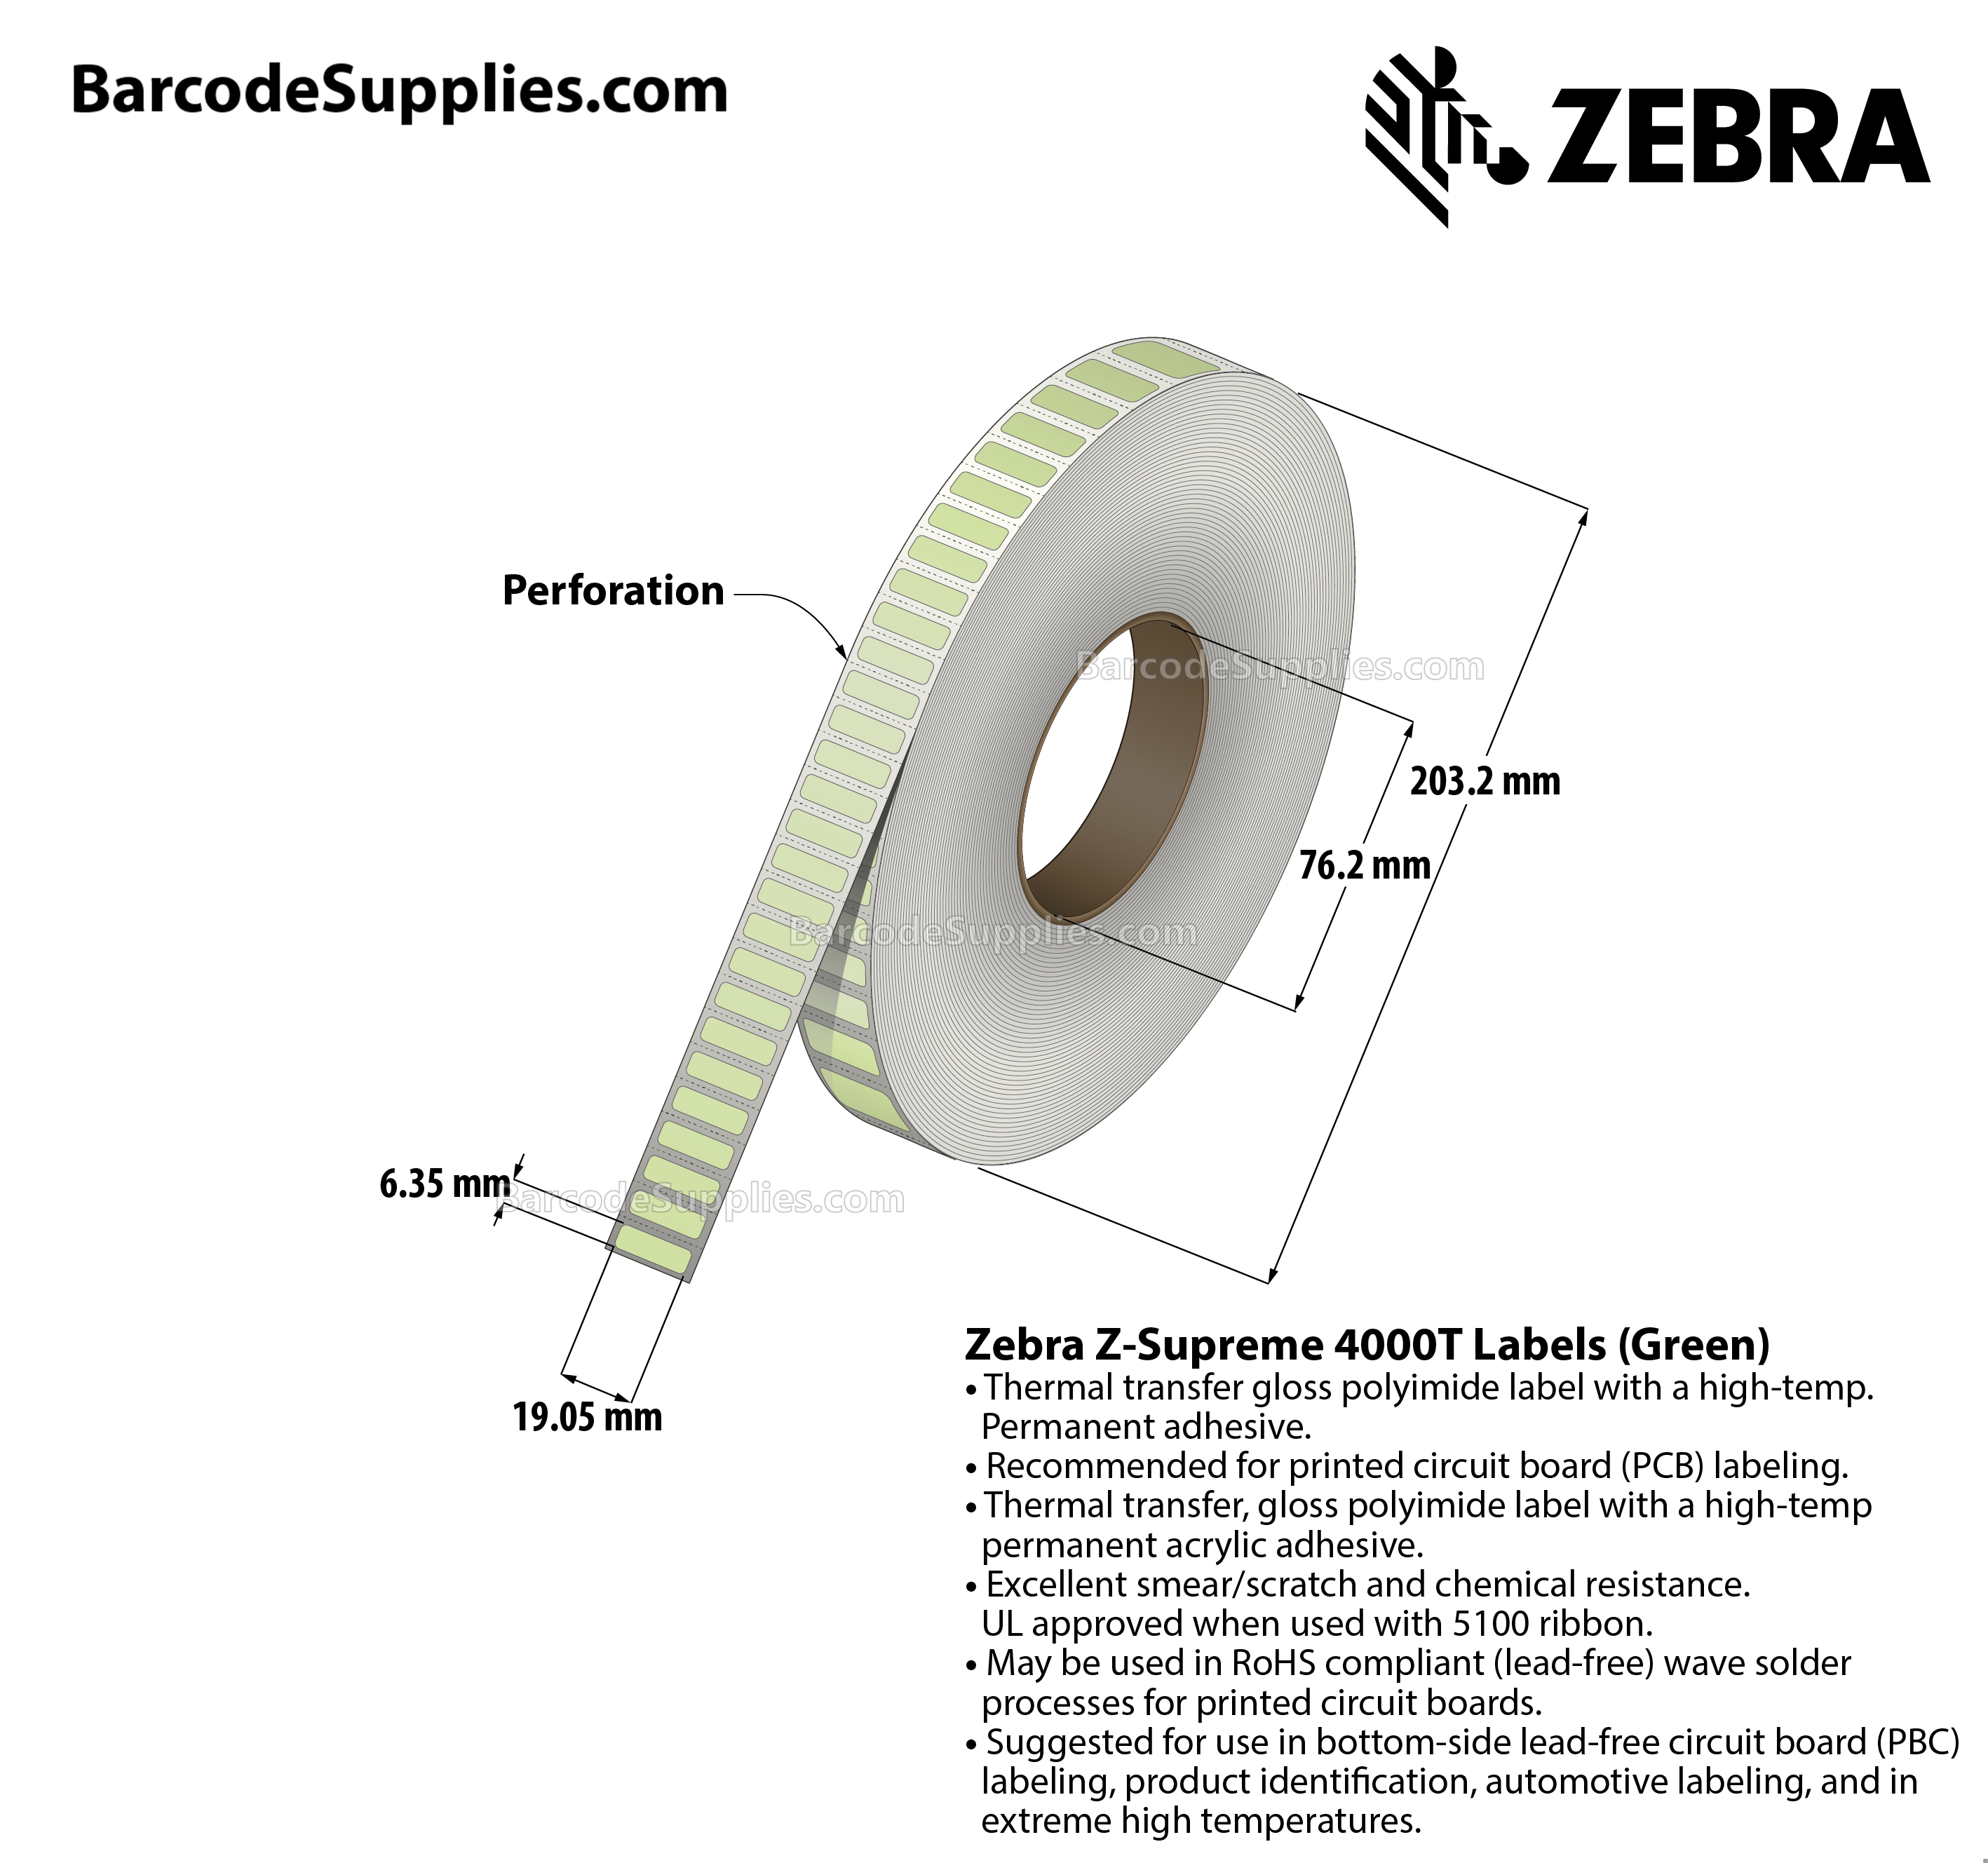 0.75 x 0.25 Thermal Transfer Green Z-Supreme 4000T Green Labels With High-temp Adhesive - Perforated - 10000 Labels Per Roll - Carton Of 1 Rolls - 10000 Labels Total - MPN: 10023312